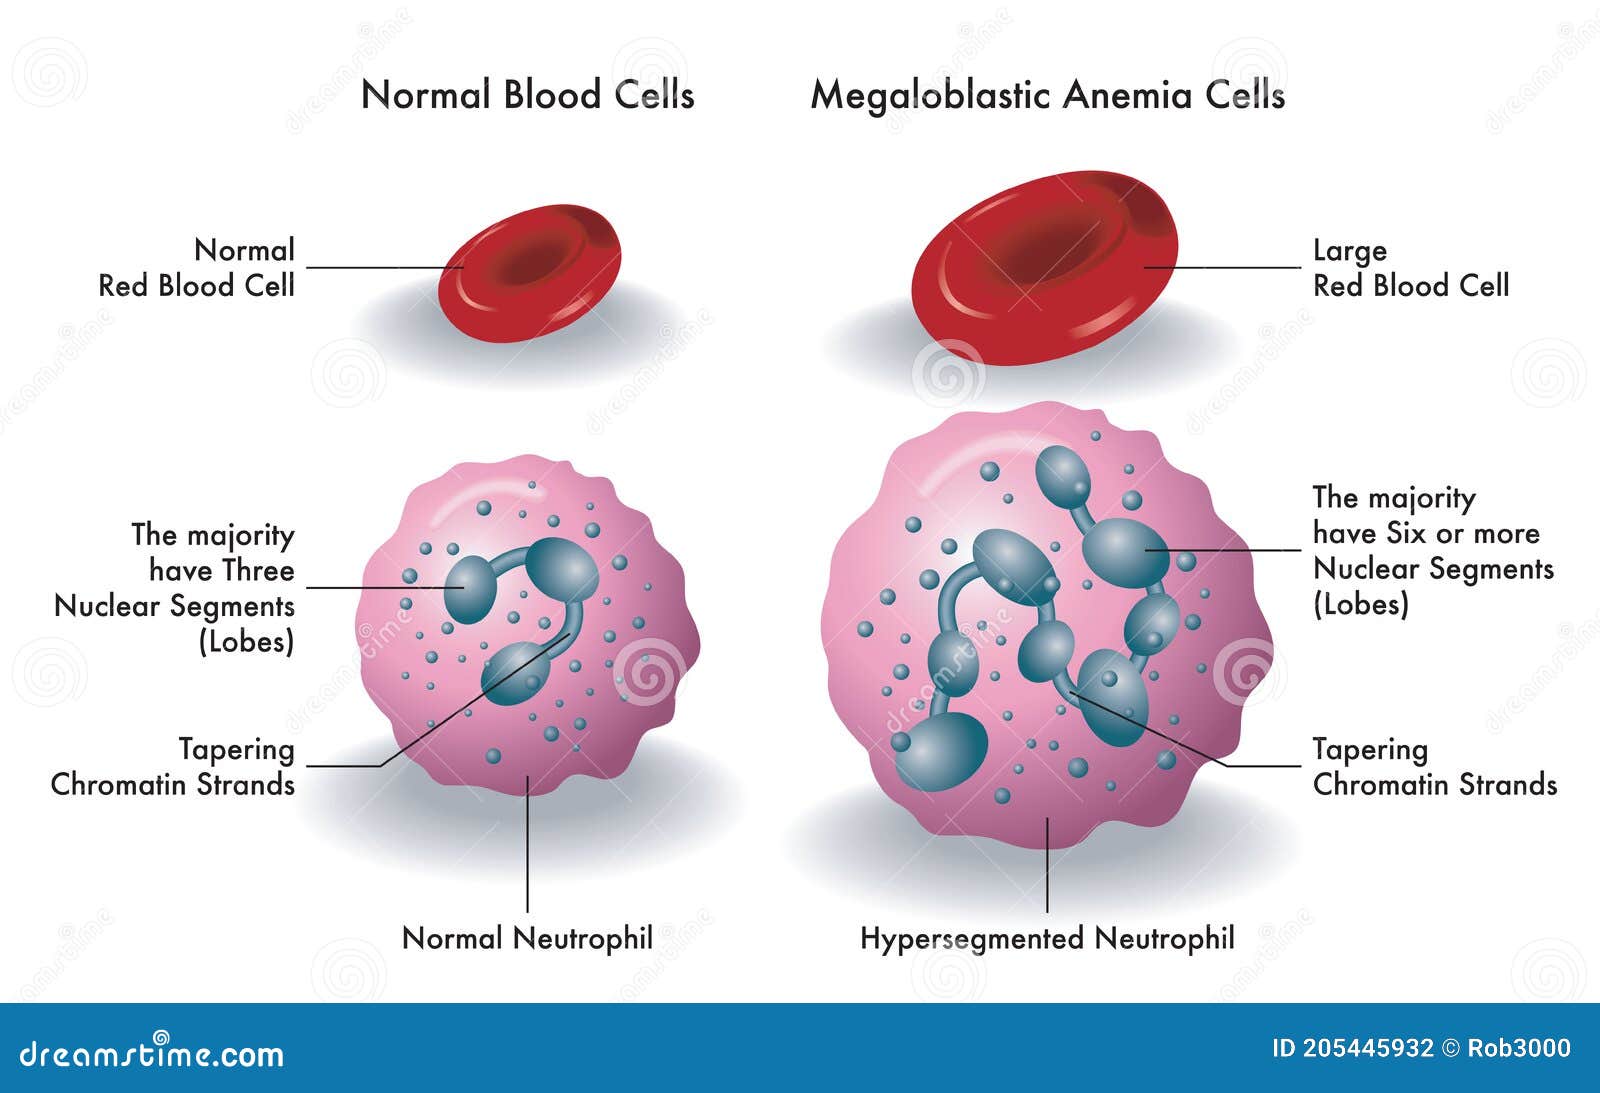 blood cells with megaloblastic anemia 